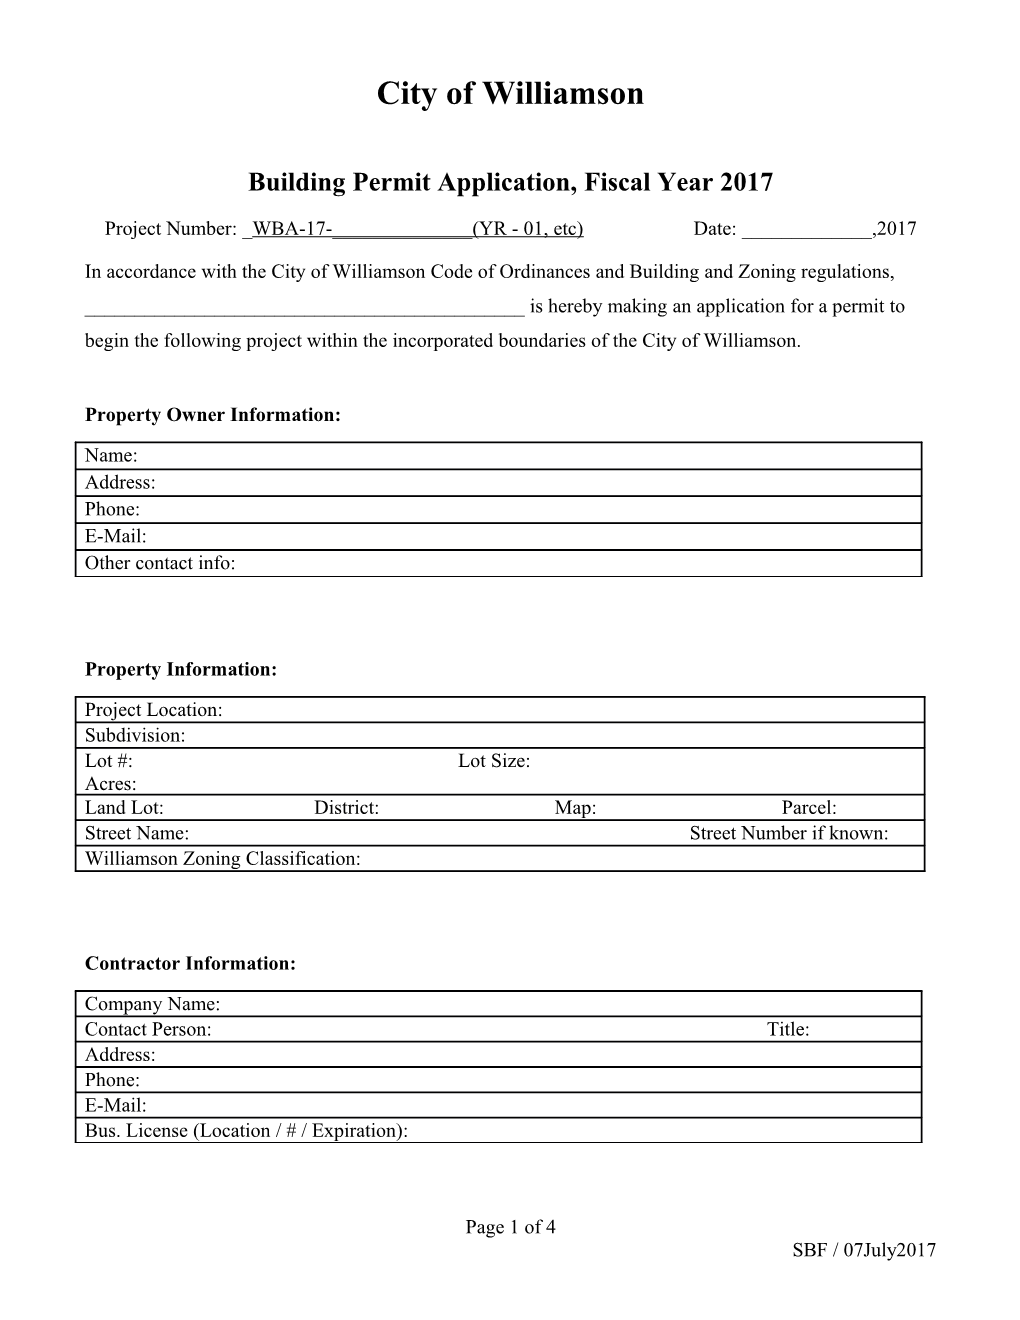 Building Permit Application, Fiscal Year 2017